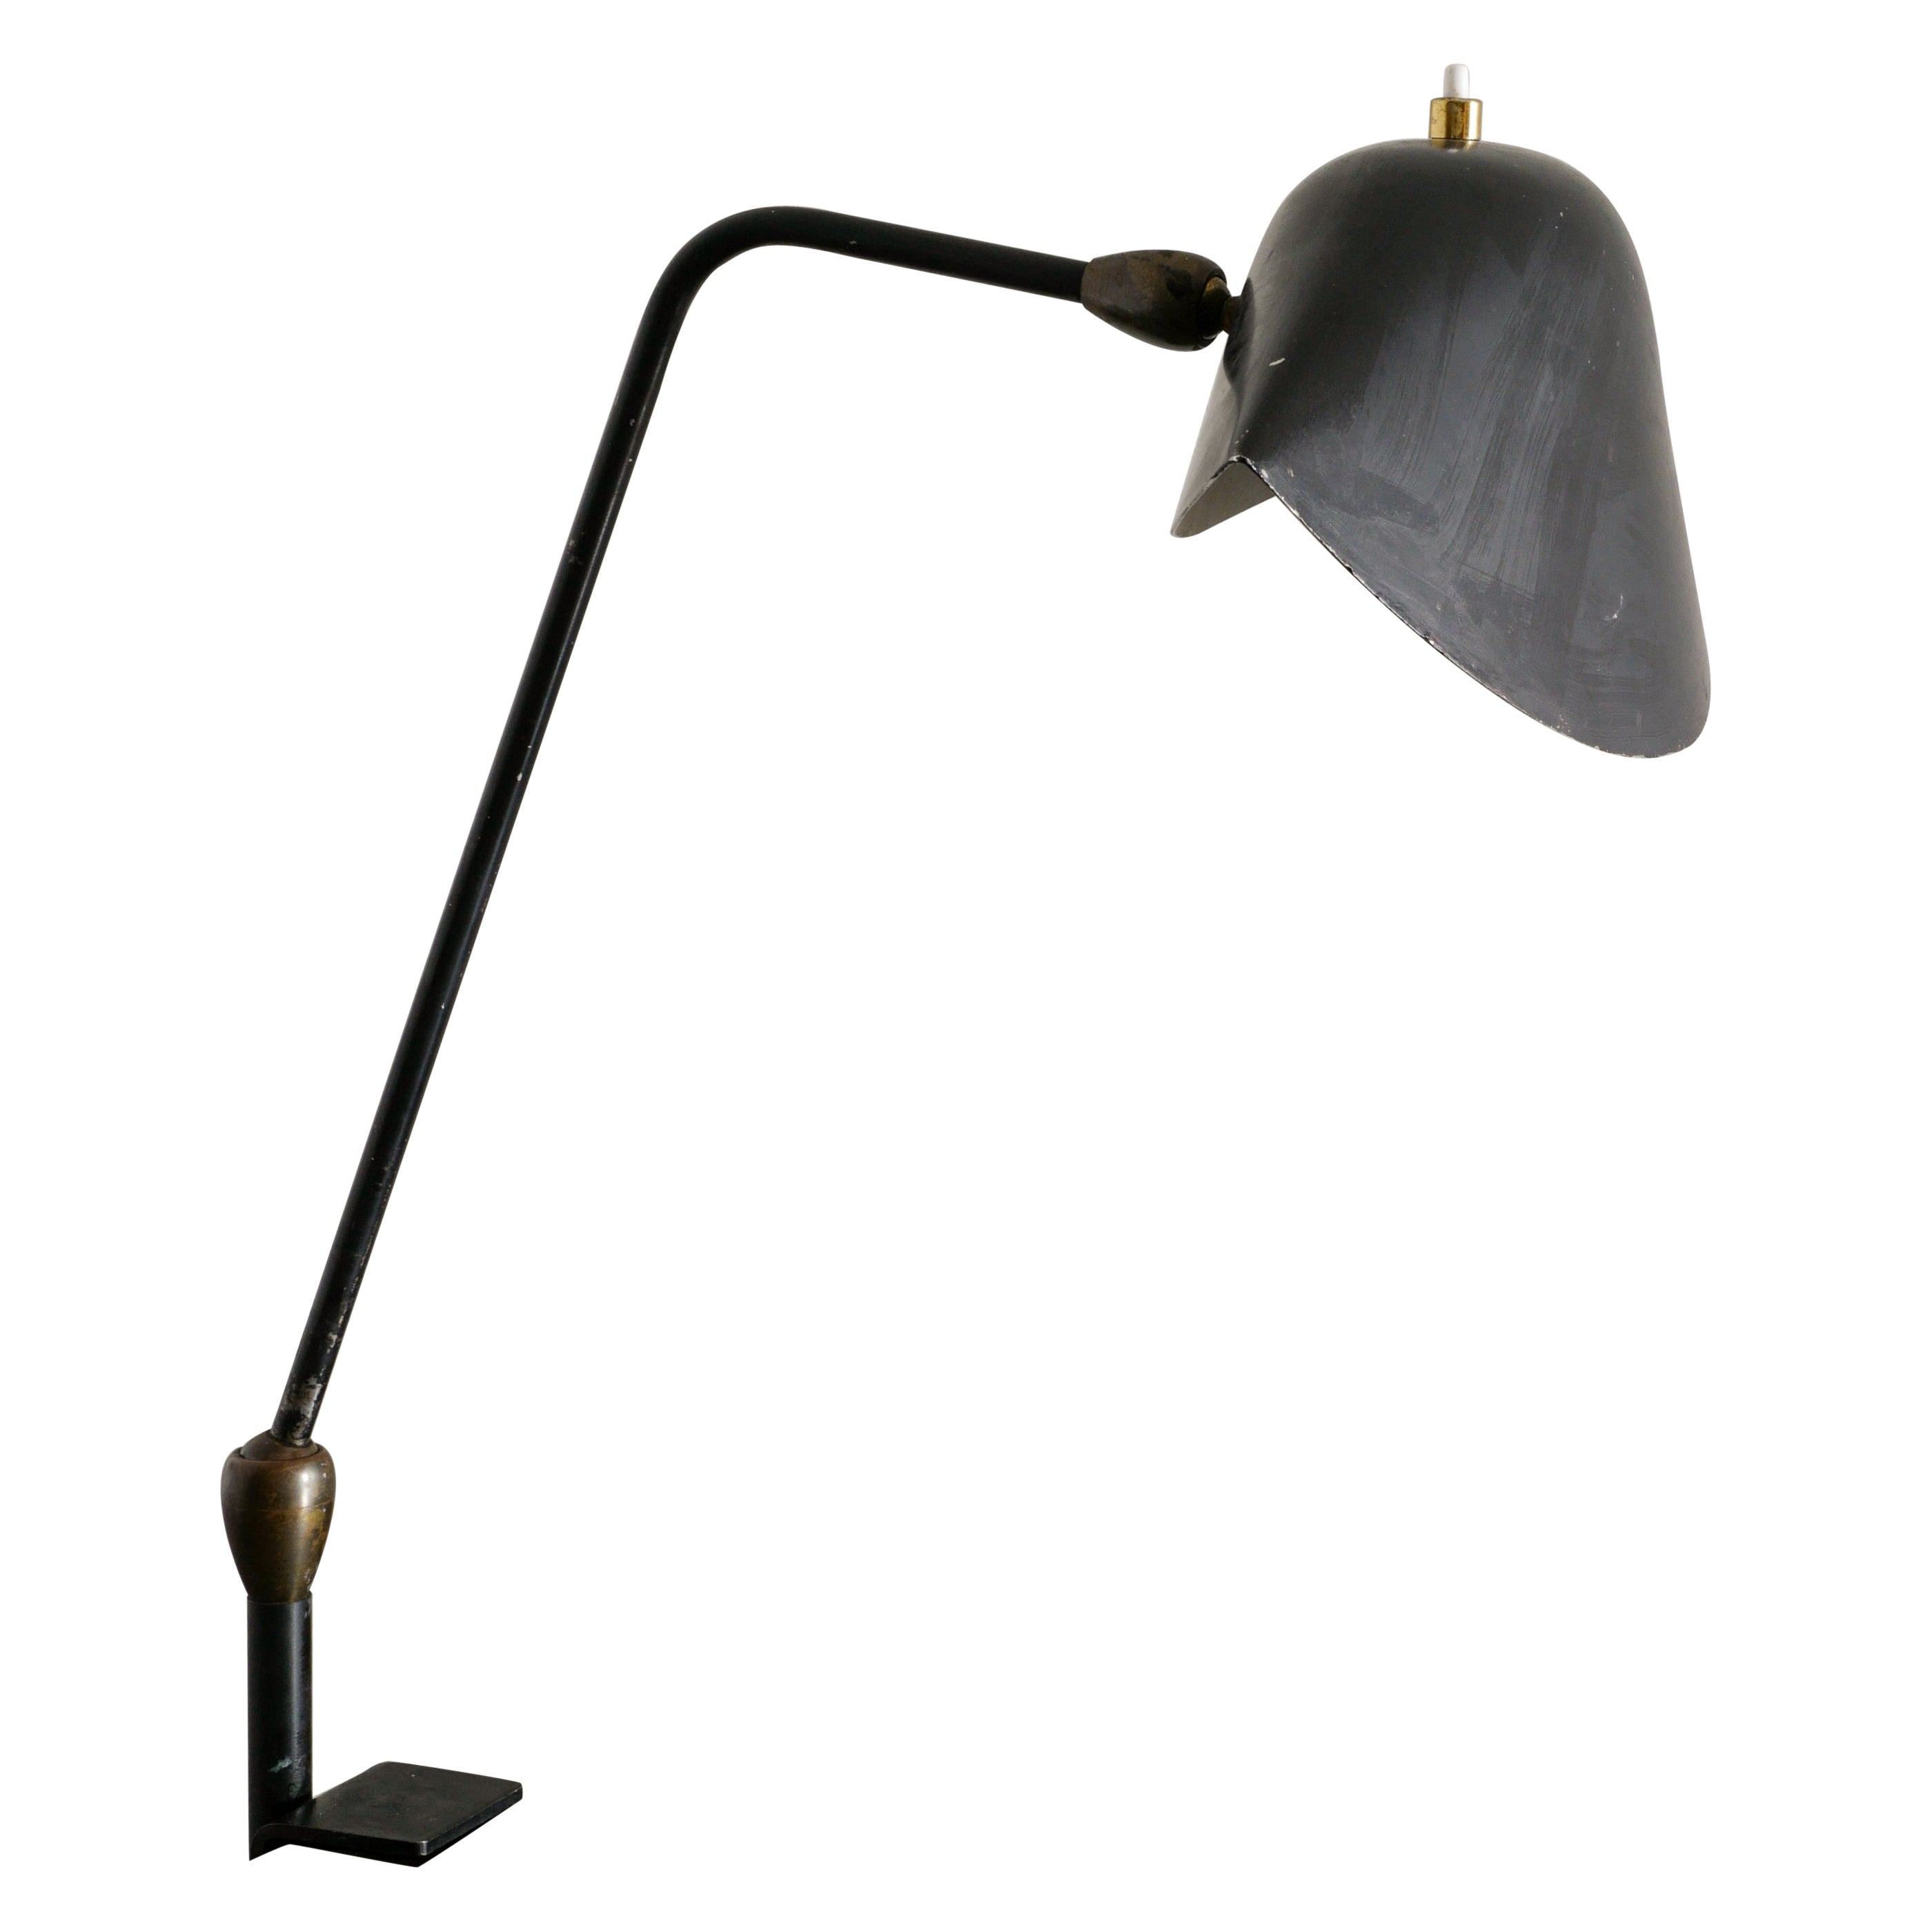 Serge Mouille "Agrafée" Mid-Century Desk Table Lamp Produced in France, 1950s